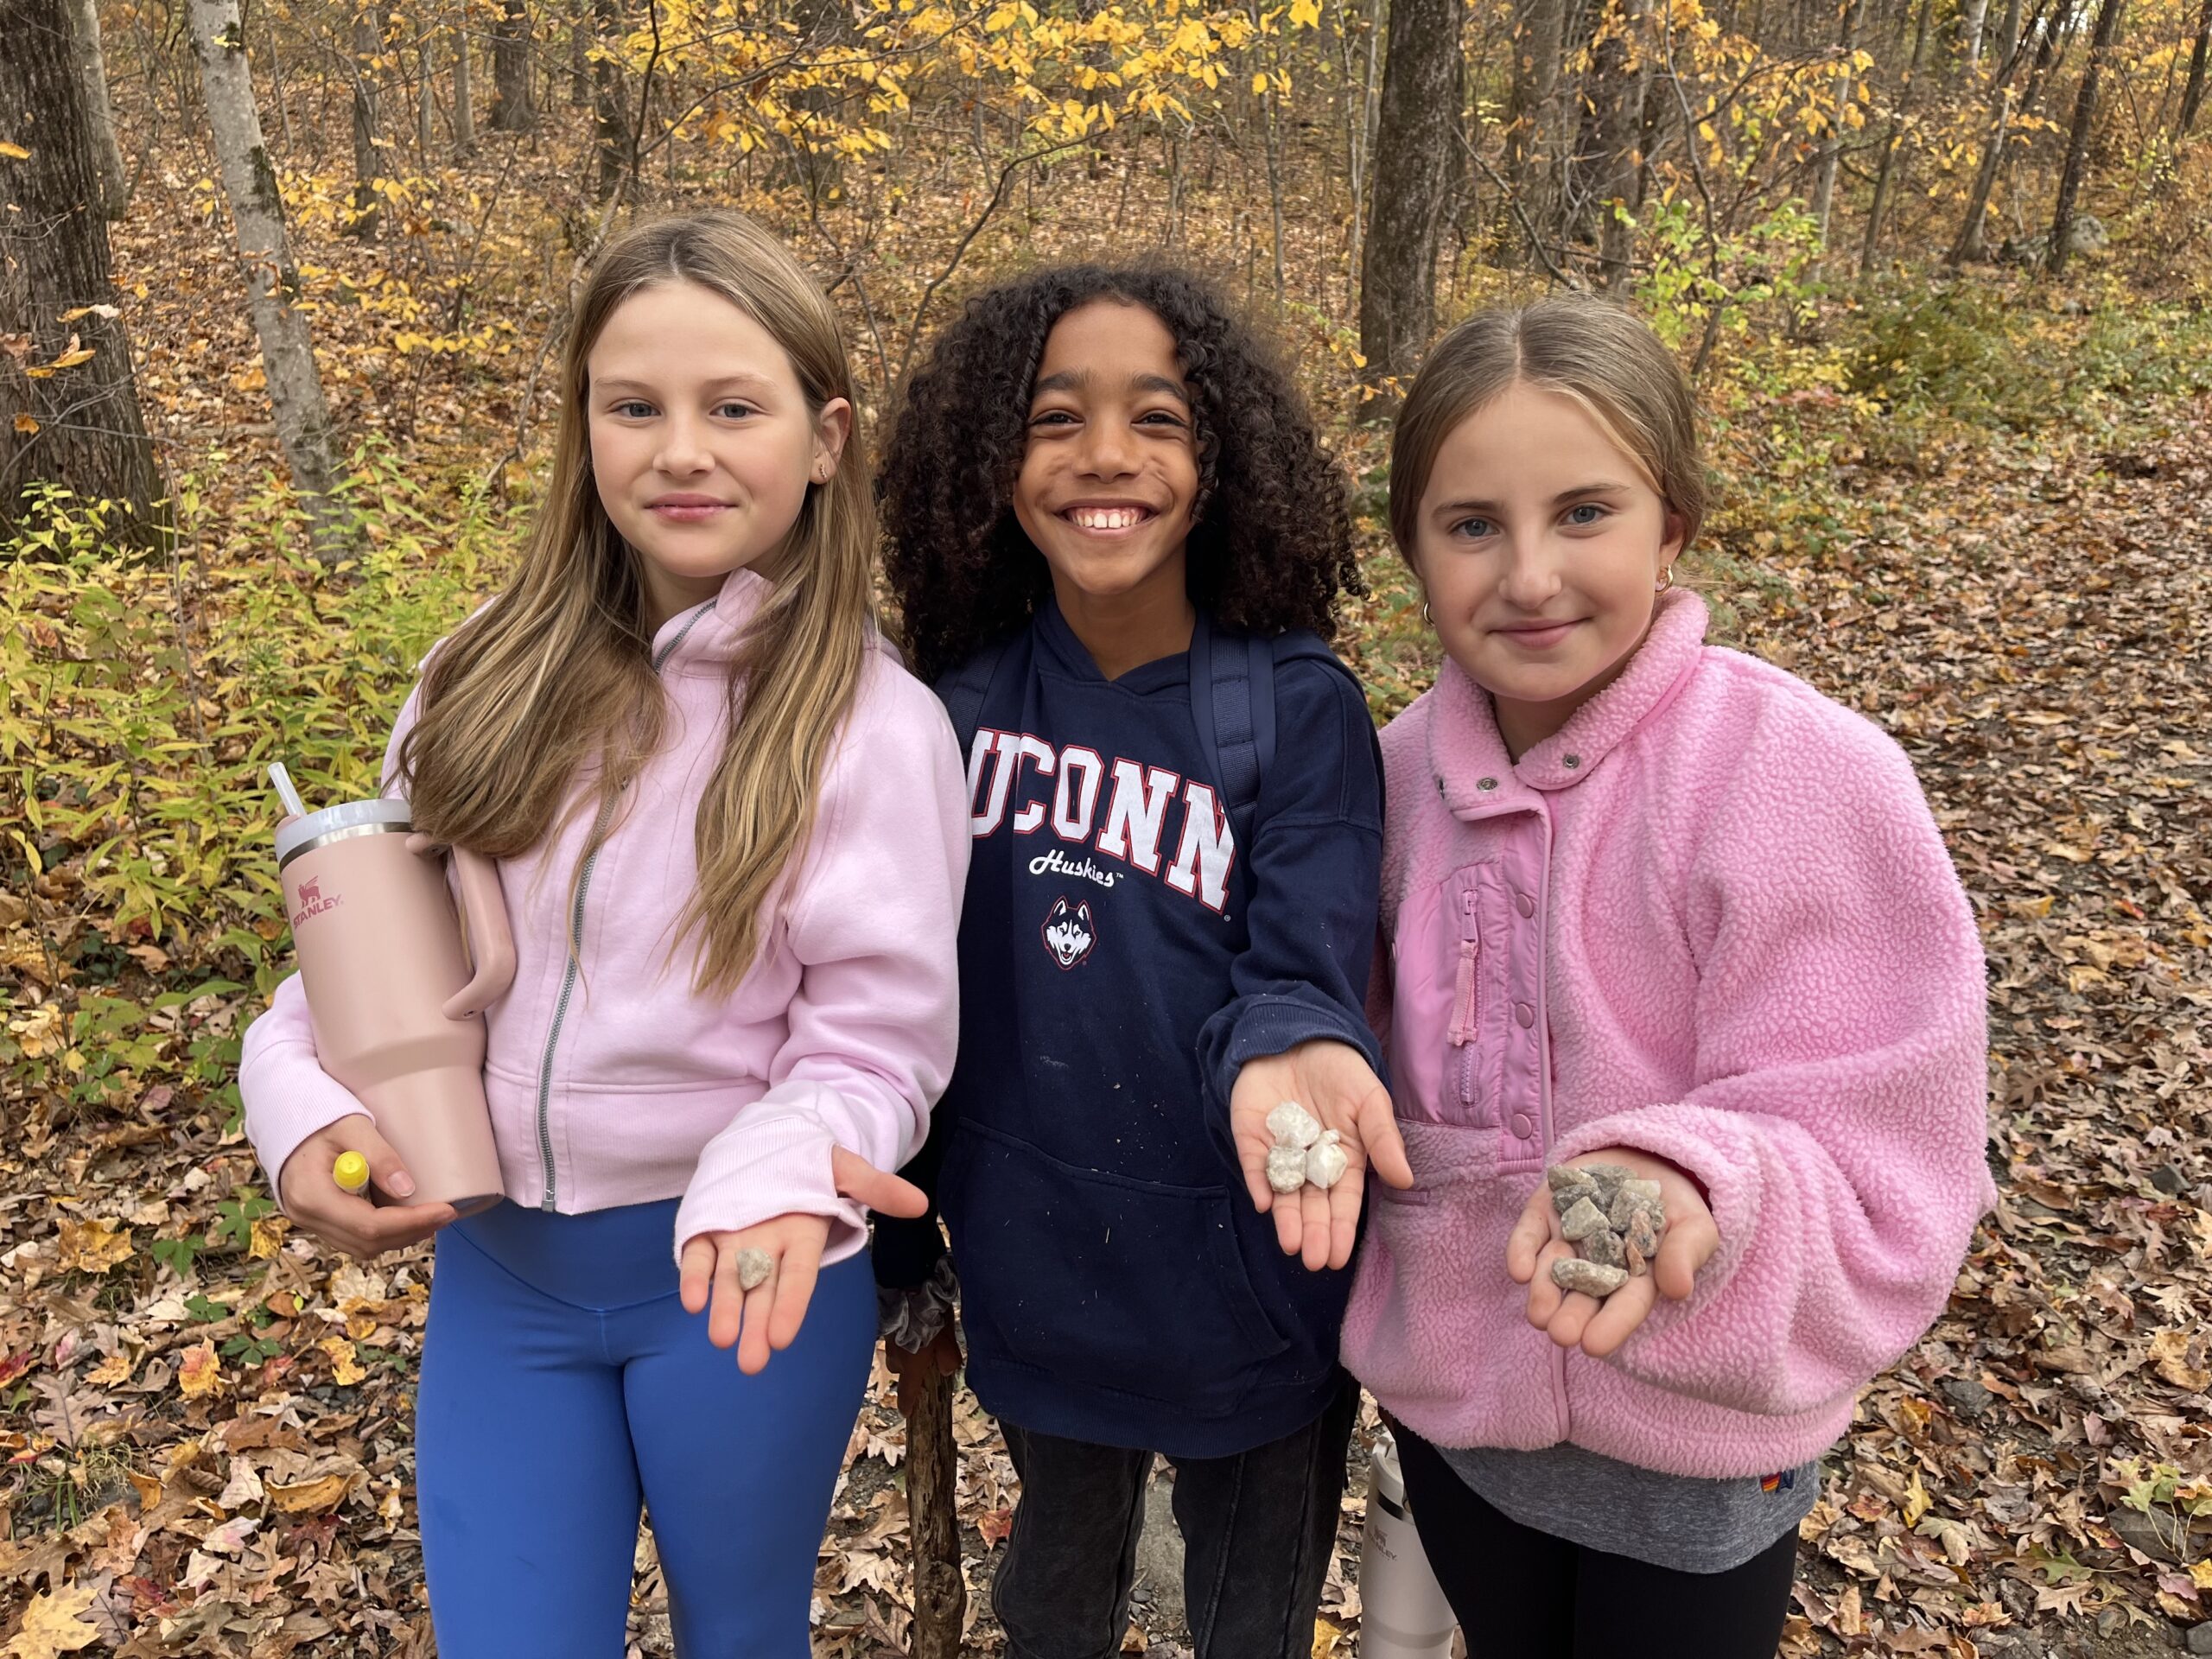 Fieldston Lower pose with rocks they found at Nature's Classroom.